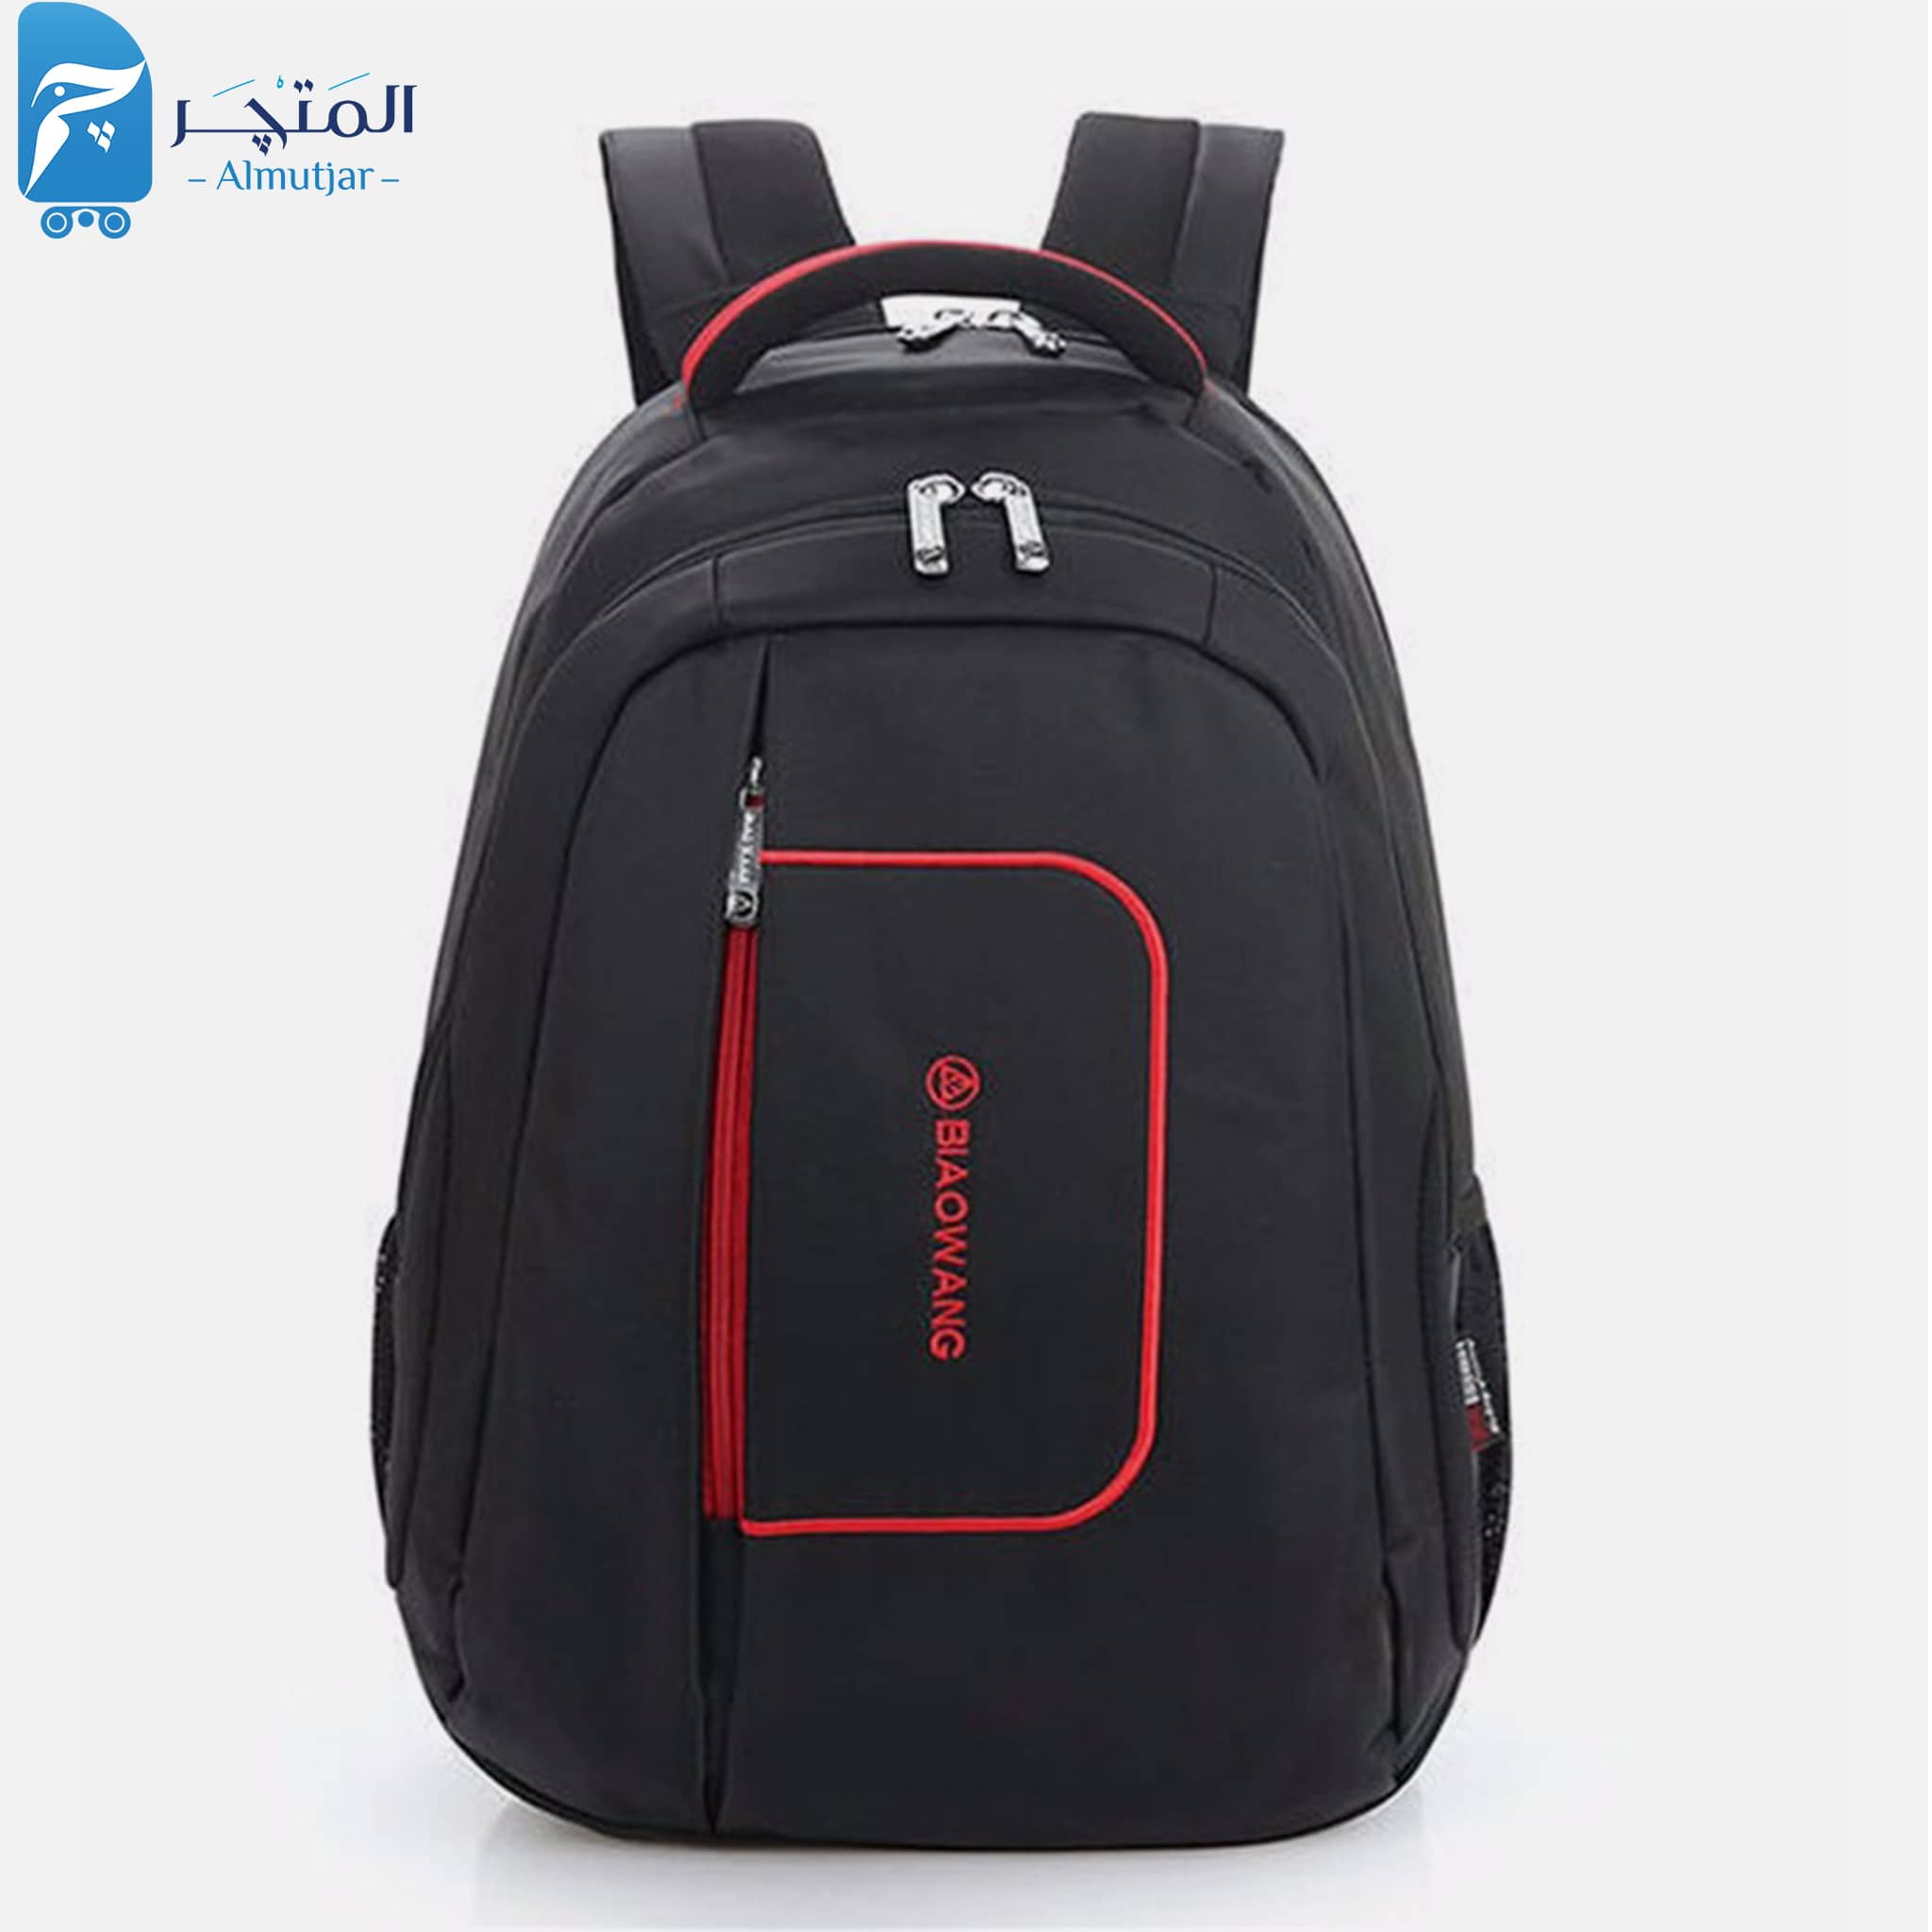 Biaowang Laptop backpack 15.6 inch bag with USB charging multi-function ...